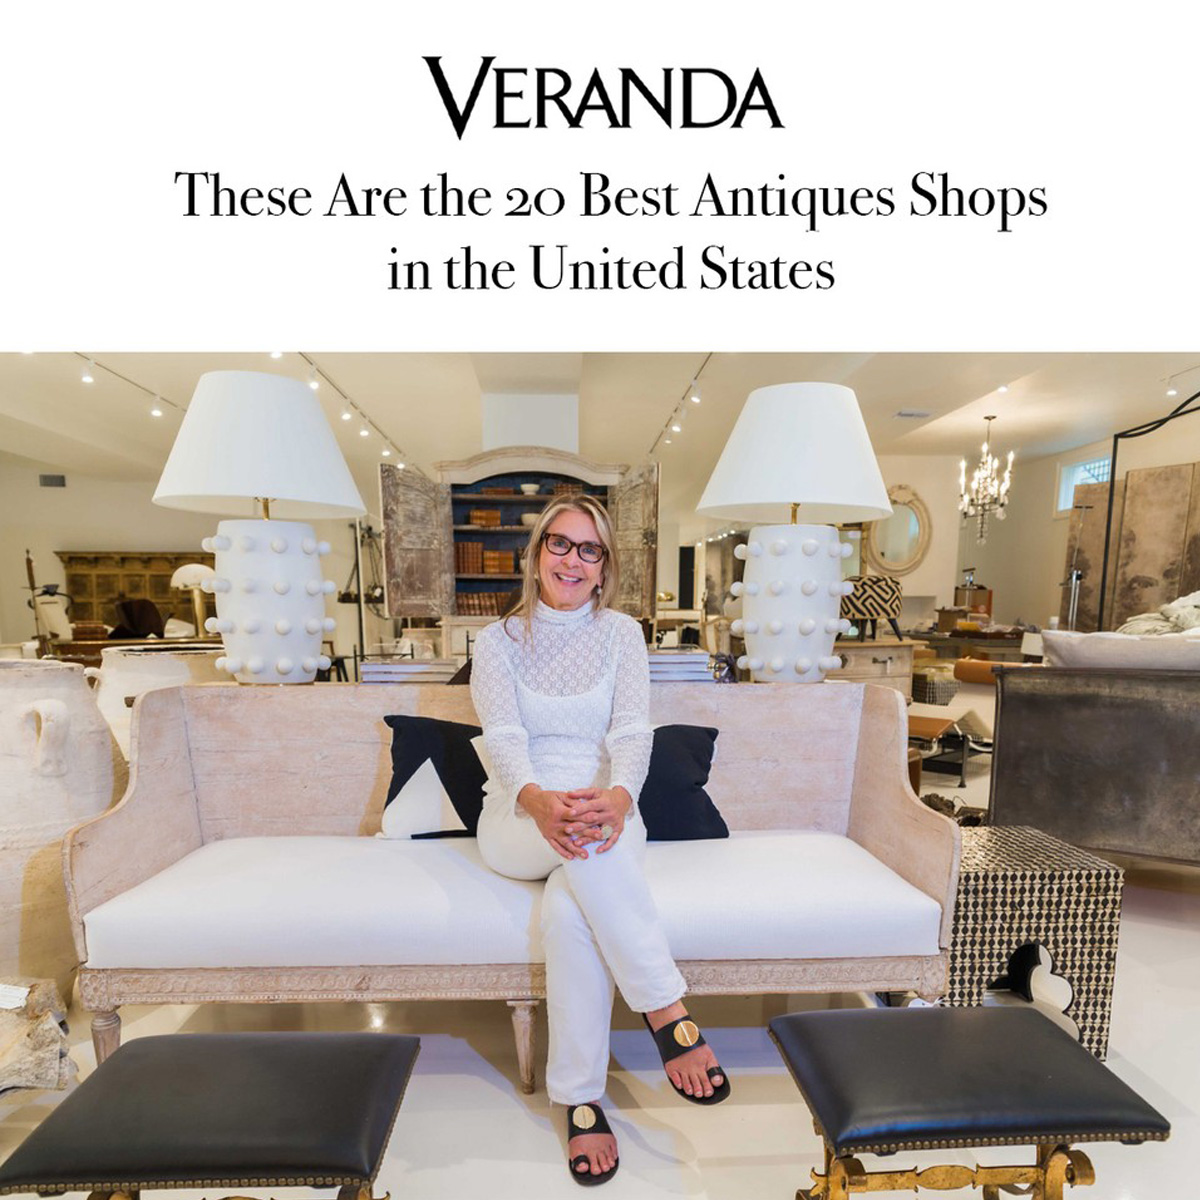 These Are the 20 Best Antiques Shops in the United States